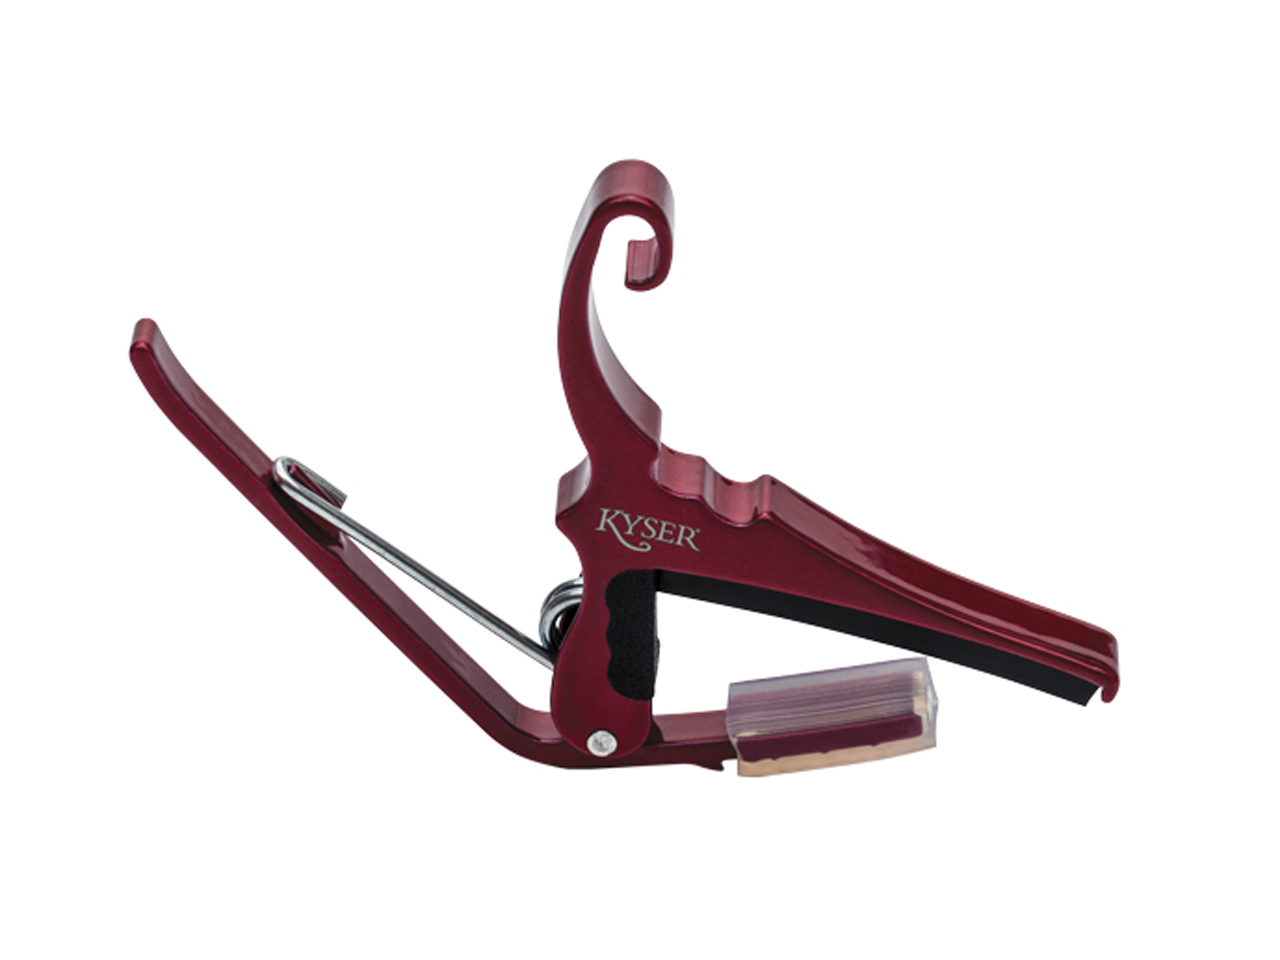 KYSER(カイザー) Acoustic Guitar Capos 6 STRING RED / KG6RA (カポタスト)